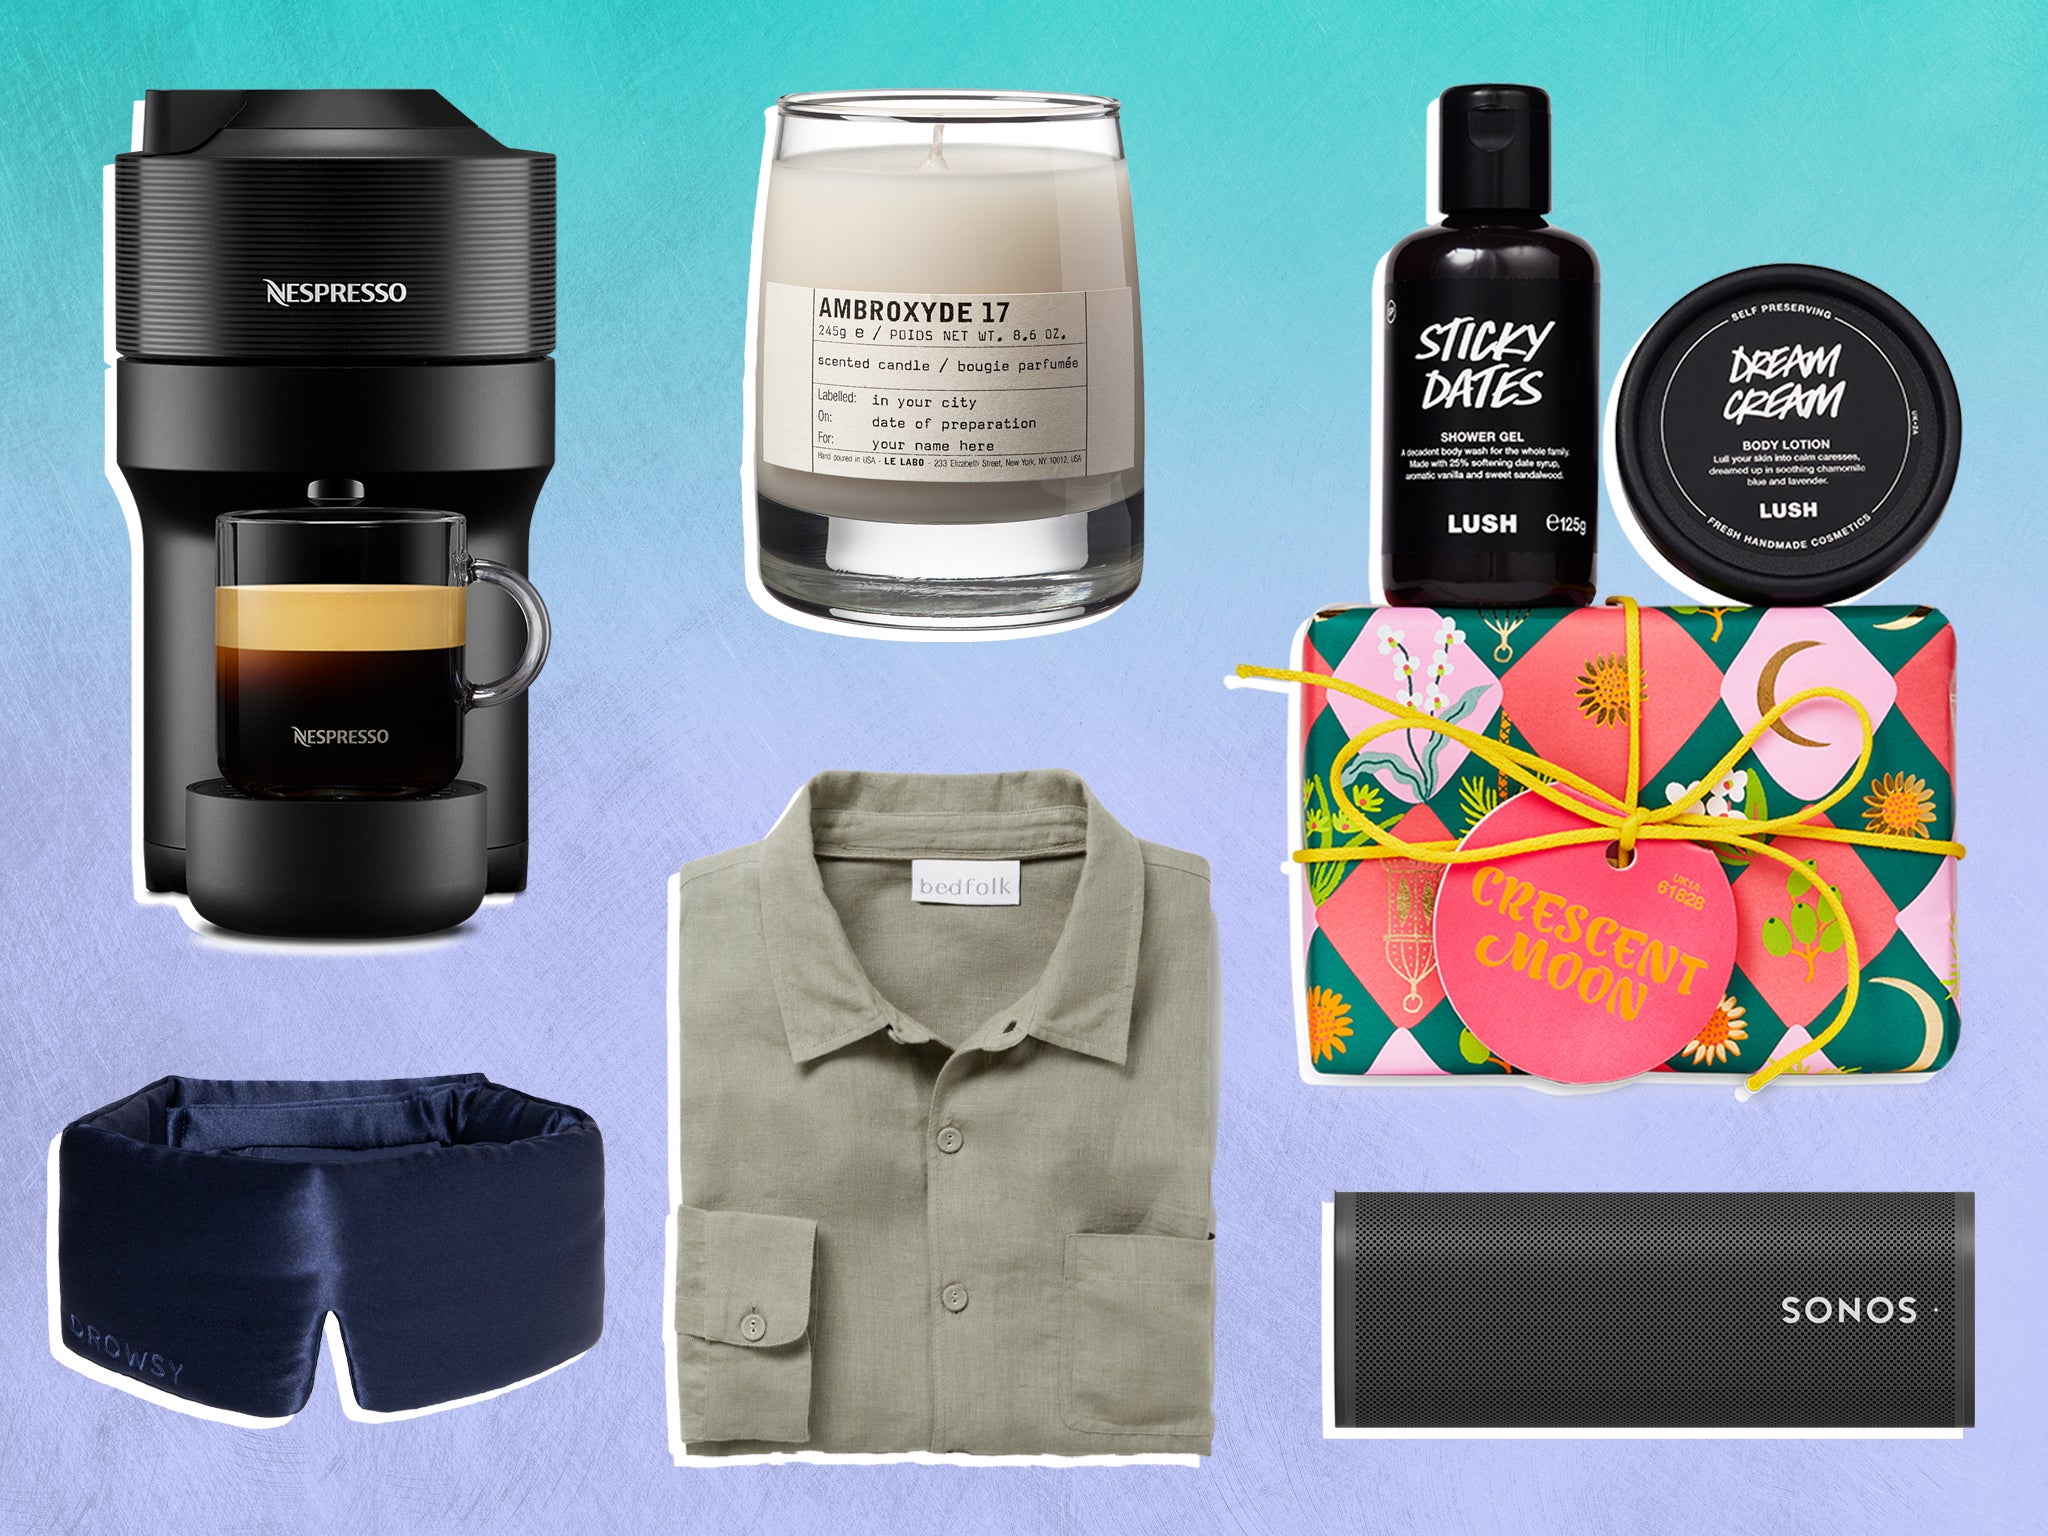 7 Eid Gift Ideas That Will Delight Your Family - Ramadany